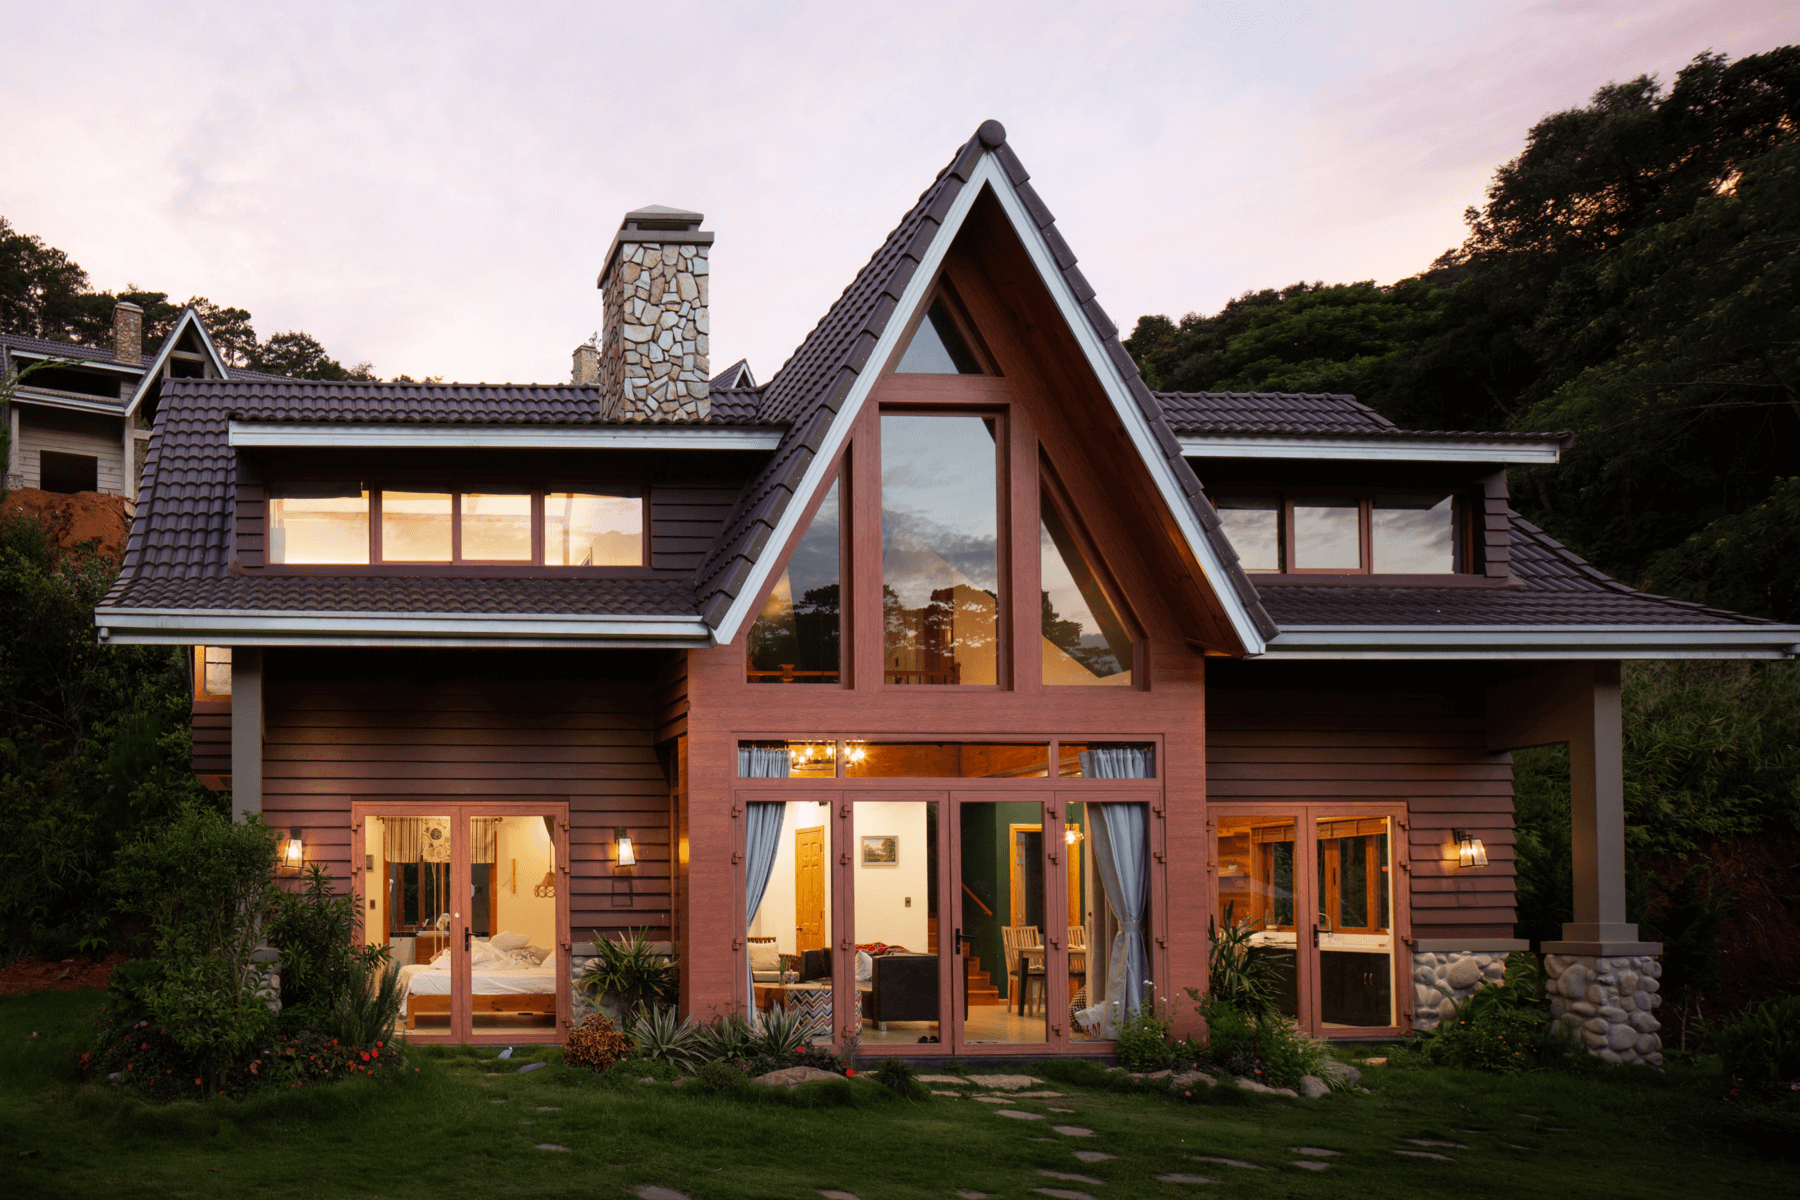 A rustic home is shown from the outside.